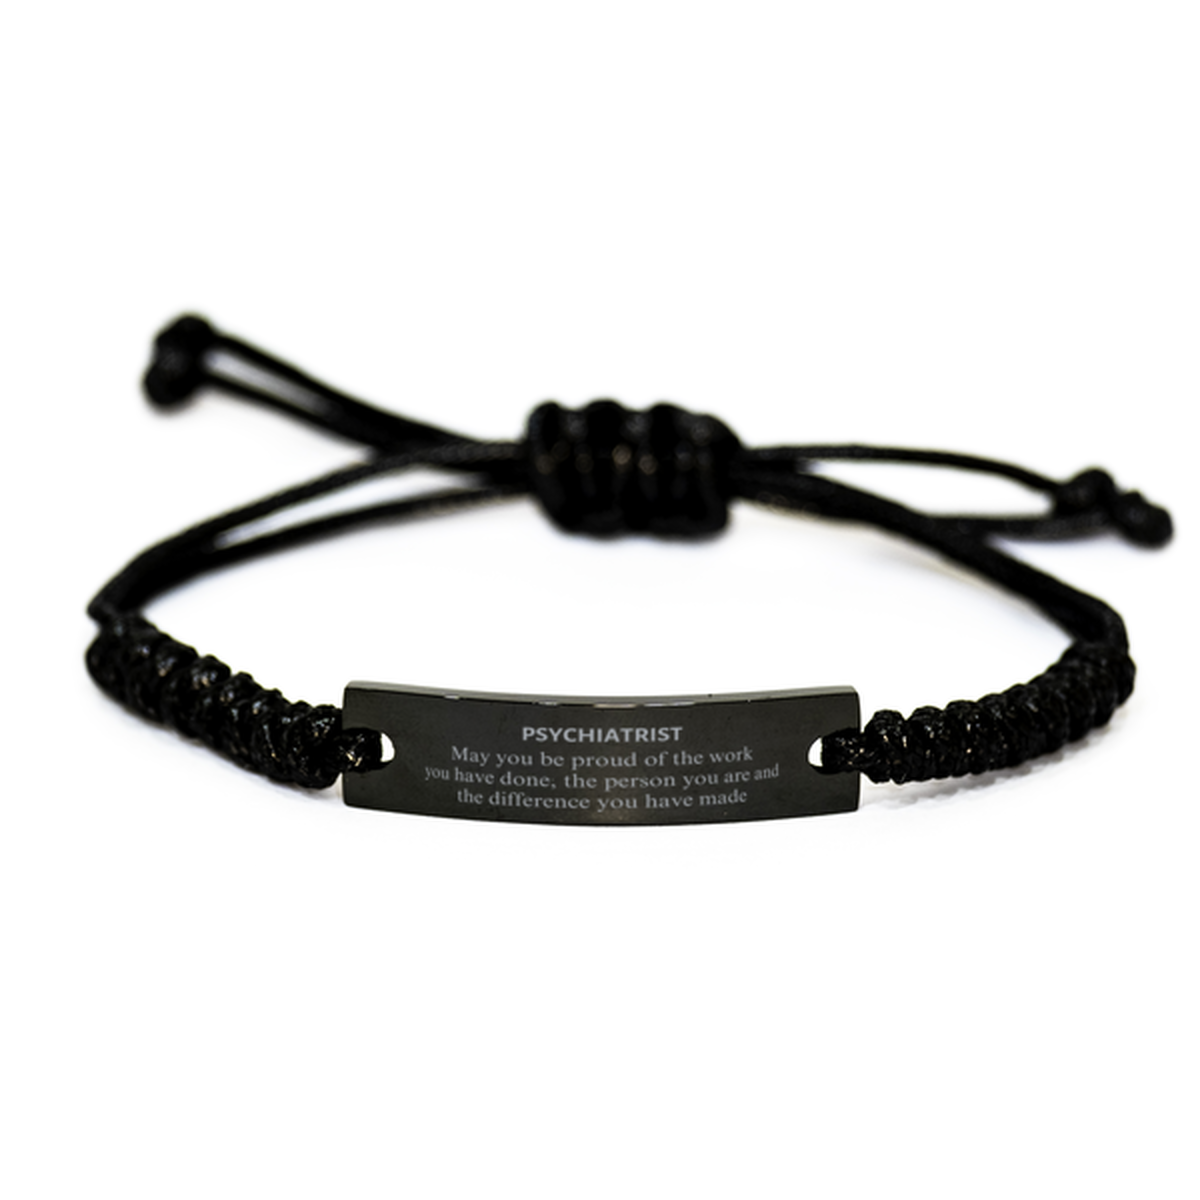 Psychiatrist May you be proud of the work you have done, Retirement Psychiatrist Black Rope Bracelet for Colleague Appreciation Gifts Amazing for Psychiatrist